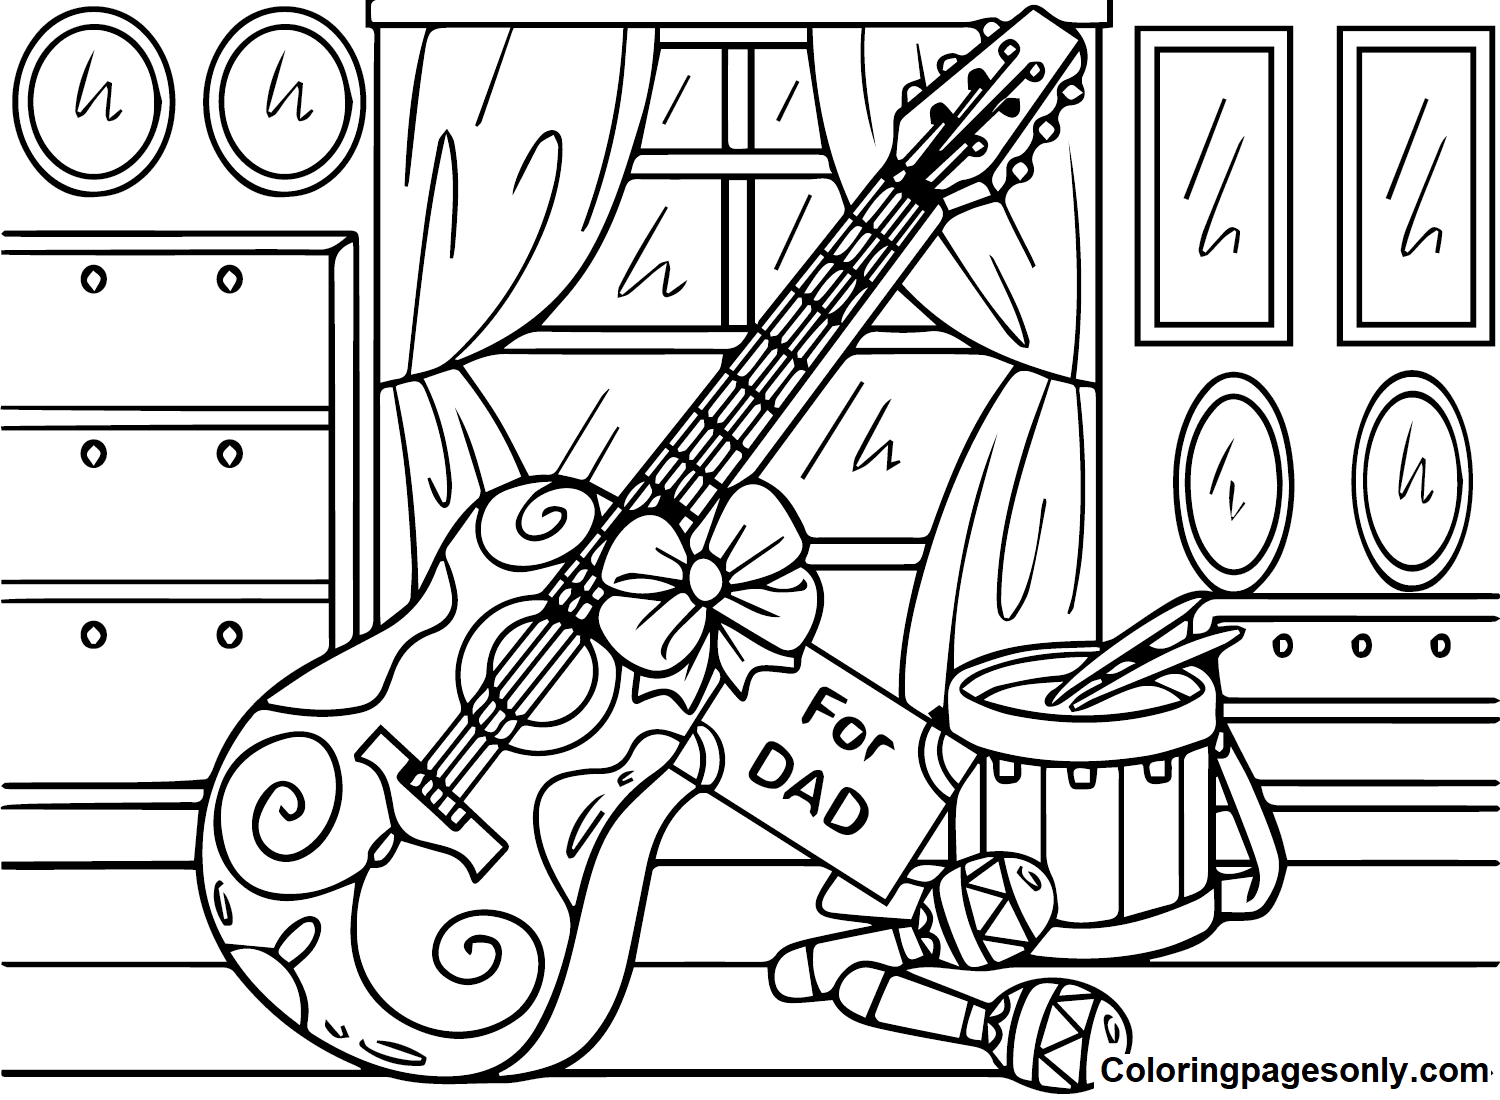 Guitar to print Coloring Page